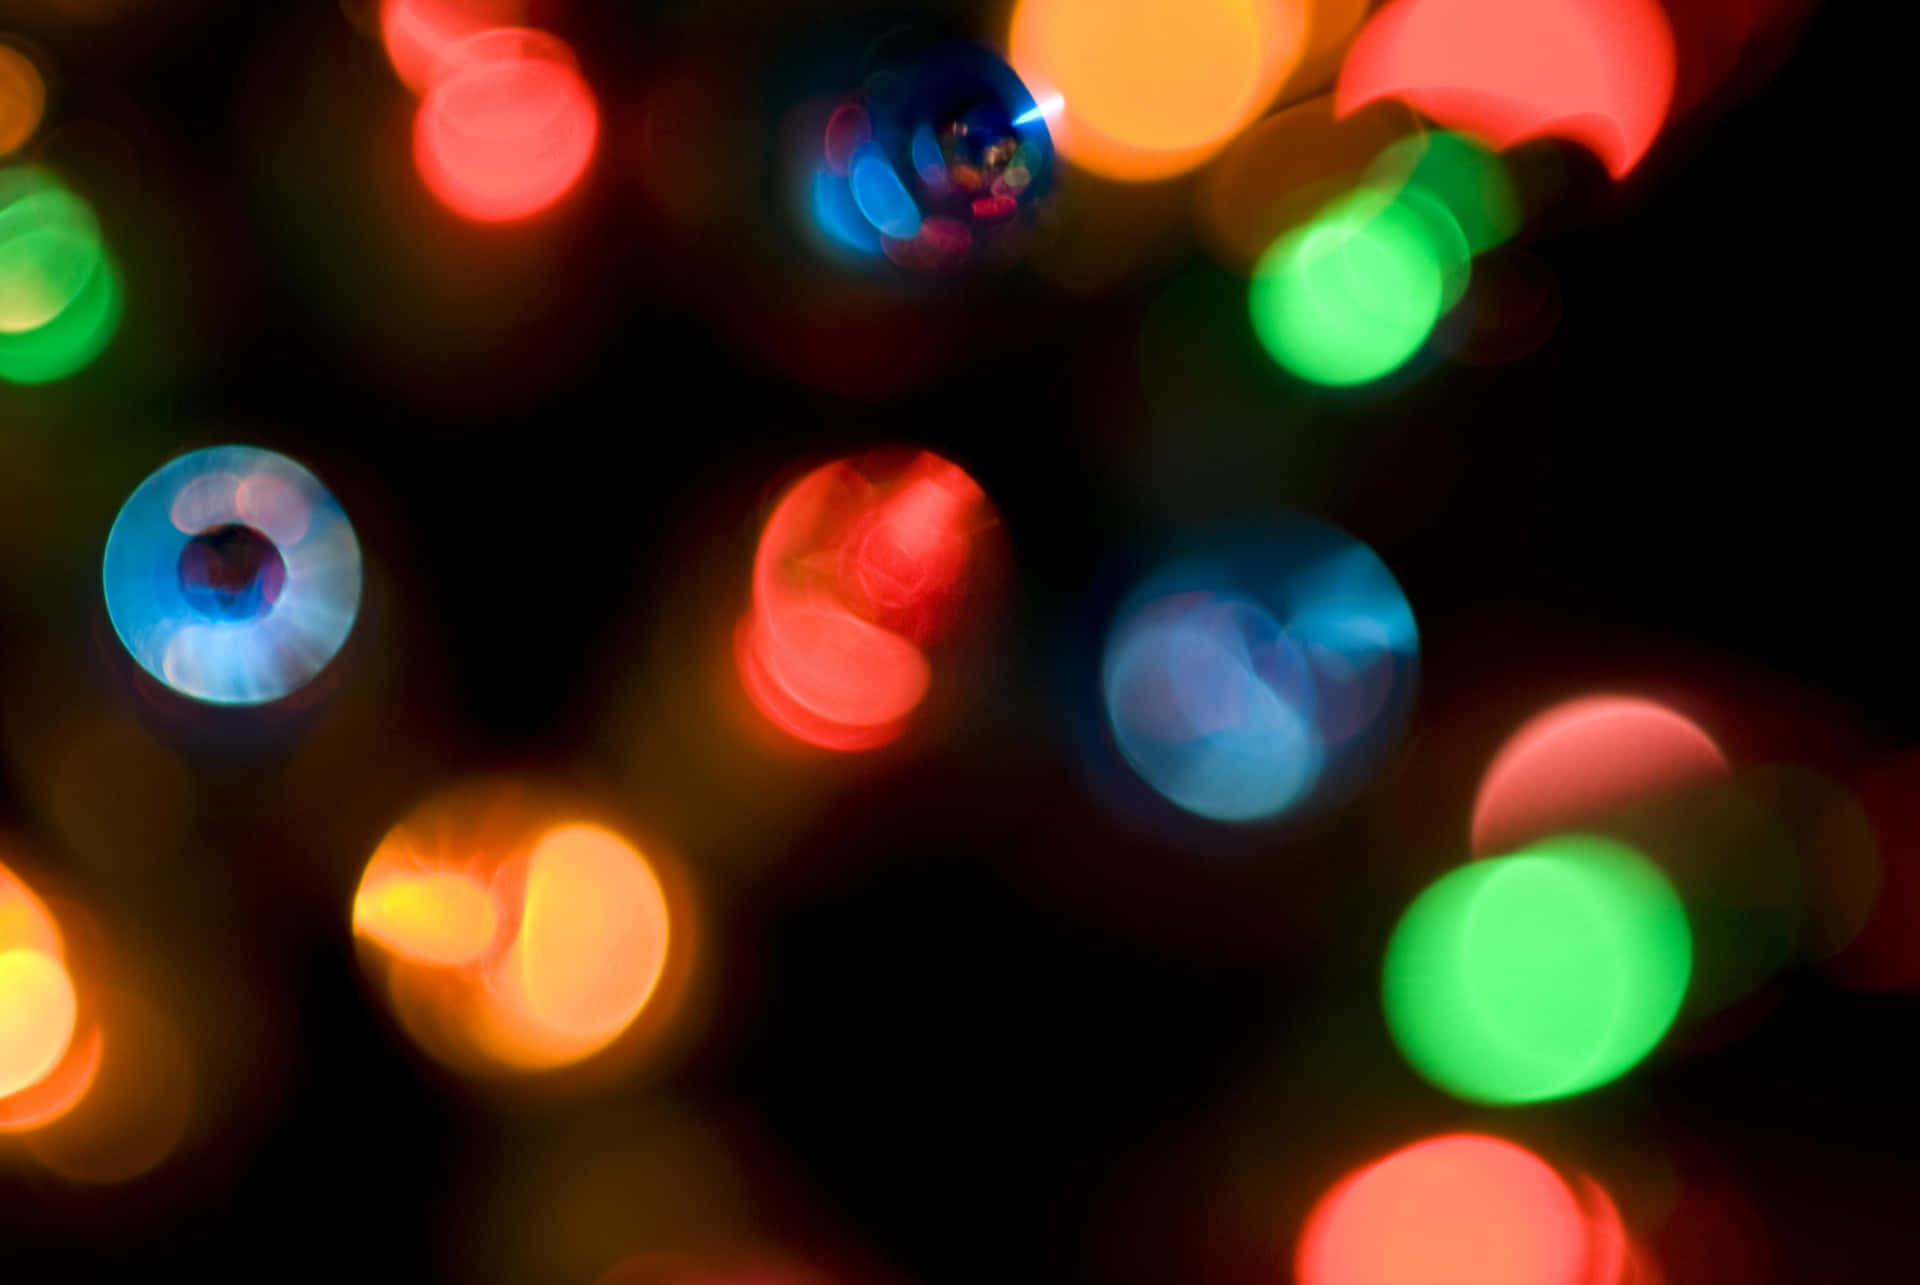 Download A Blurry Image Of Lights | Wallpapers.com